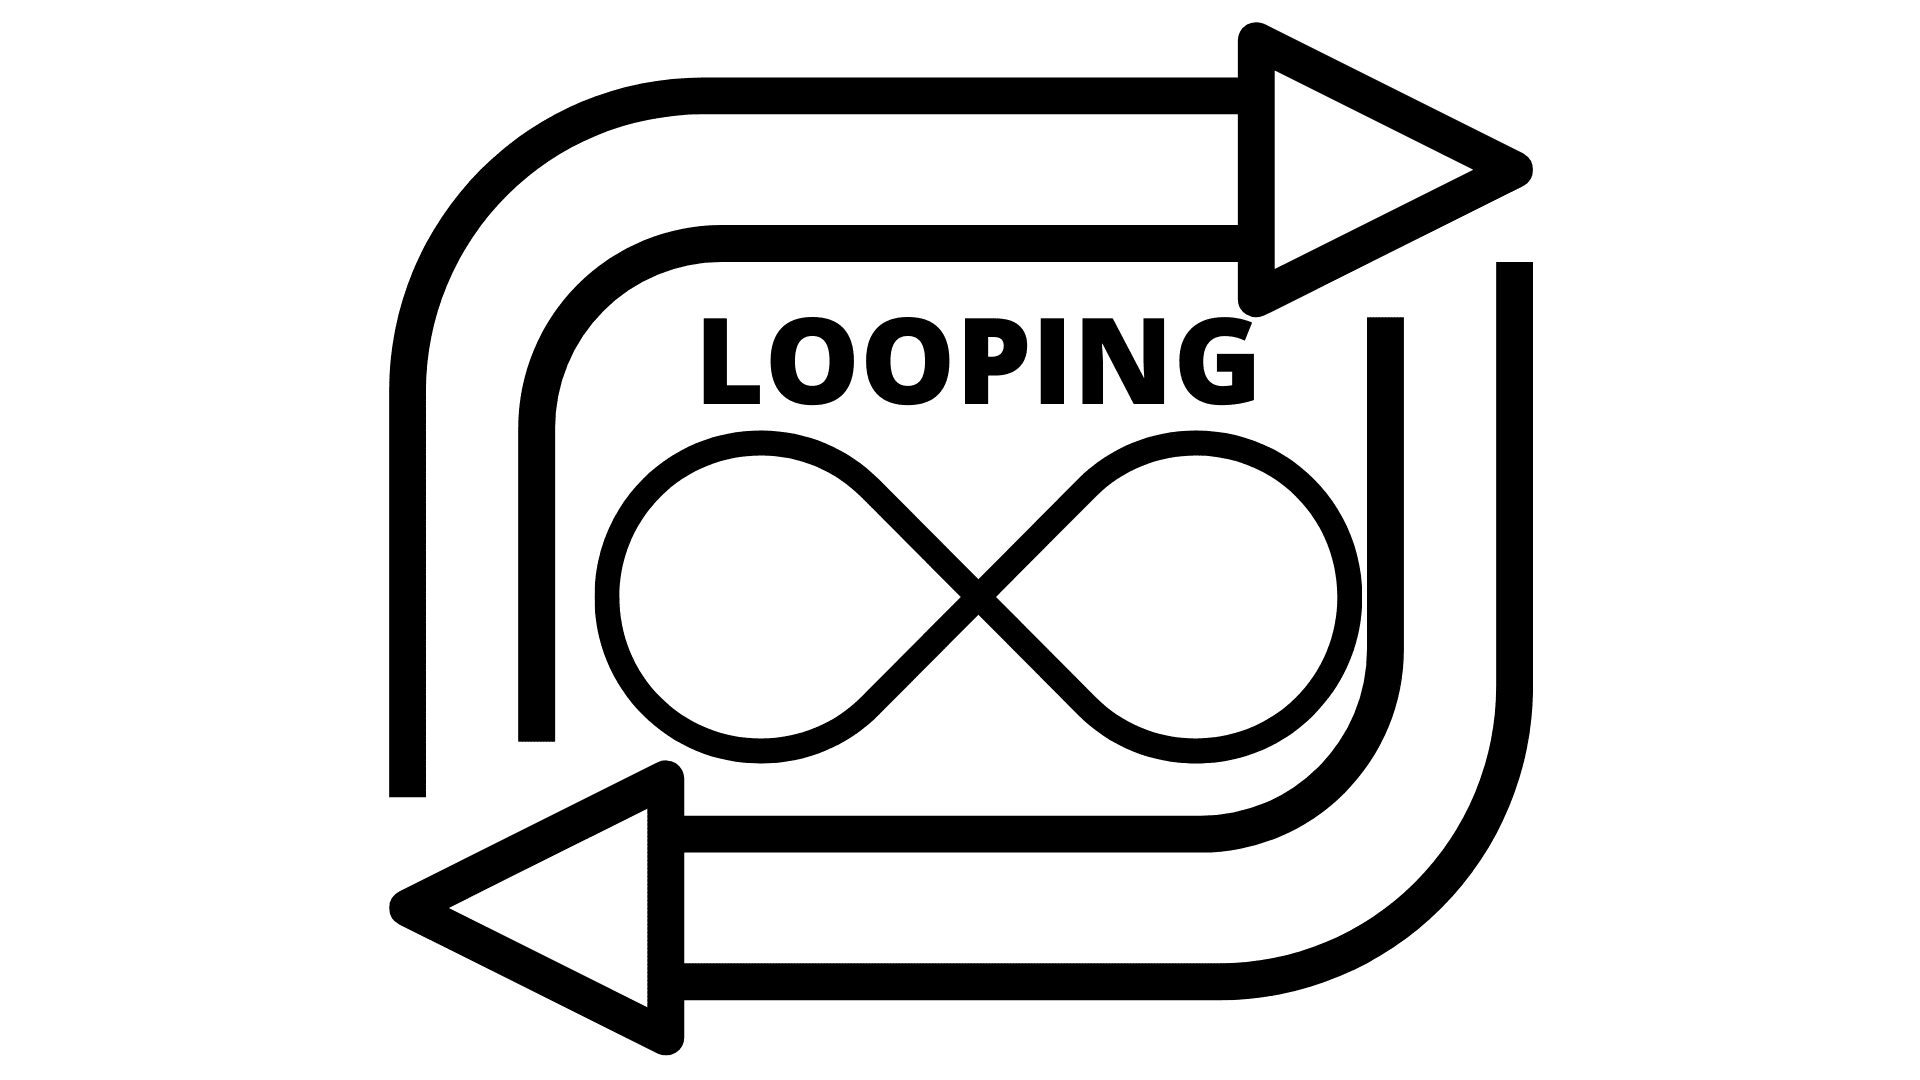 Loops in programming can be used to iterate through a list of items